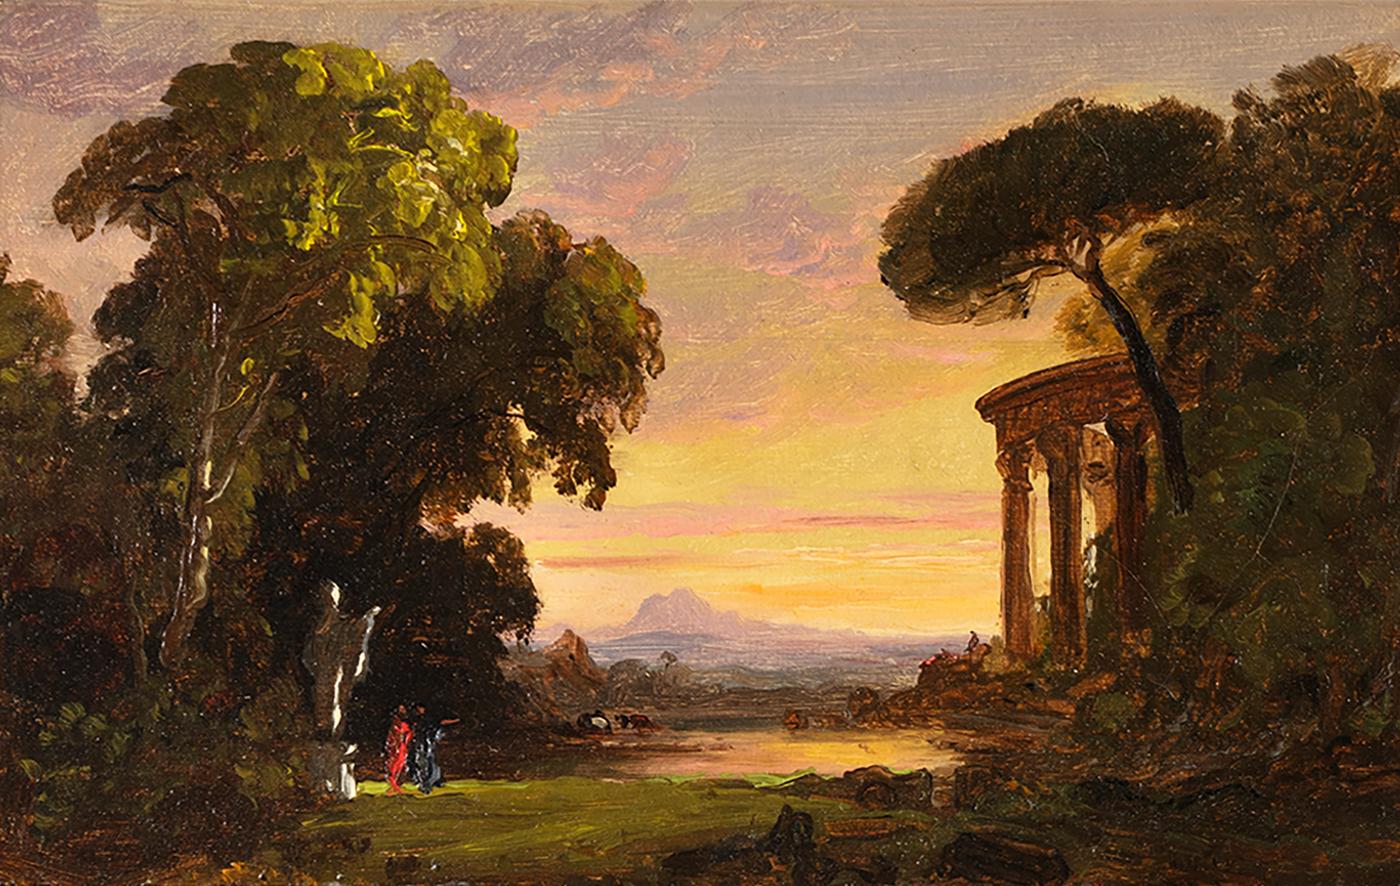 Ruins with Figures